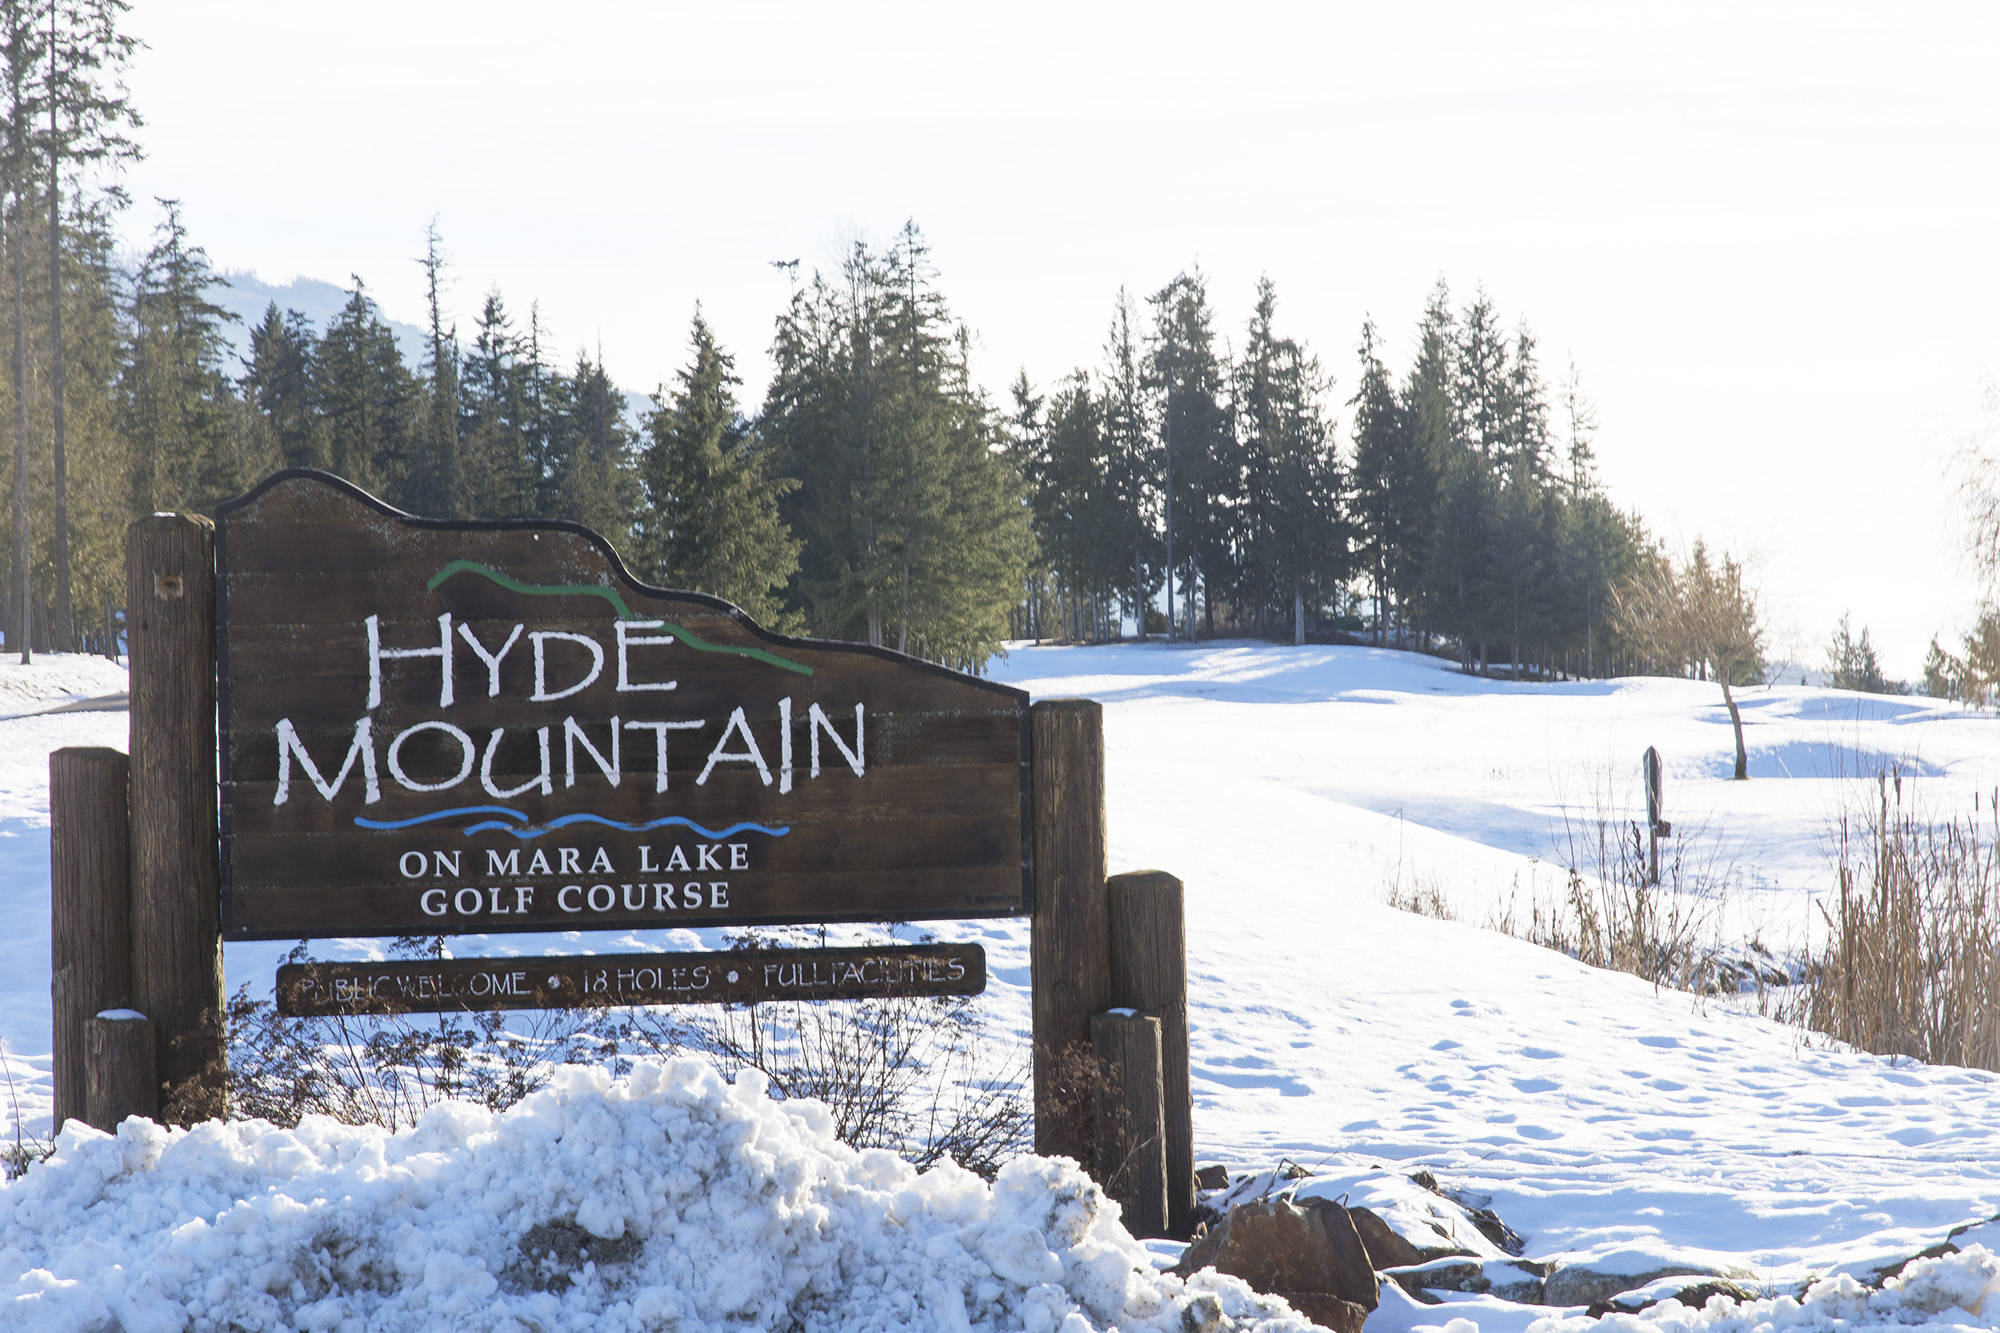 Hyde Mountain Golf Course is pursuing a bylaw amendment to accommodate more than 100 strata lots for recreational vehicles, as well as to bring an onsite helicopter tour business into compliance. (Jim Elliot/Eagle Valley News)